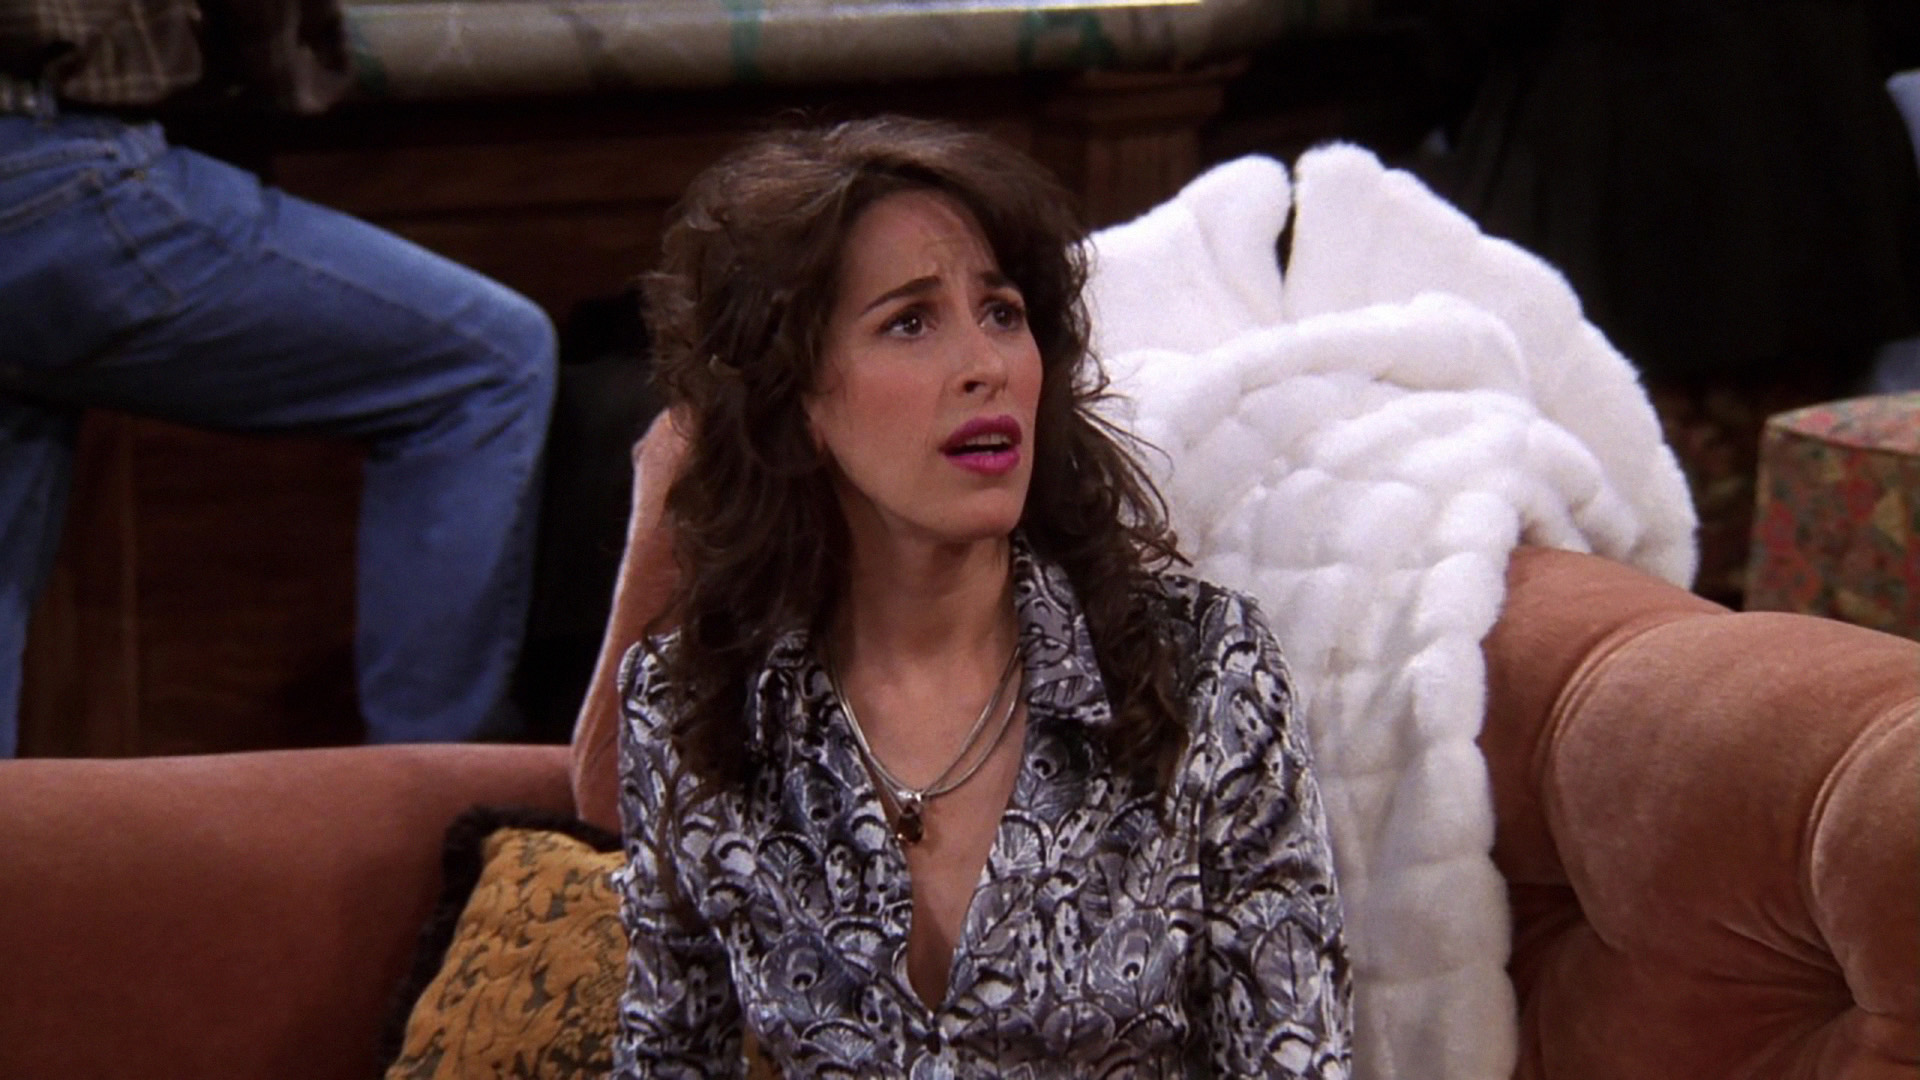 The Friends Character We All Secretly Love: Why Janice is a Fan Favorite Despite Being Annoying